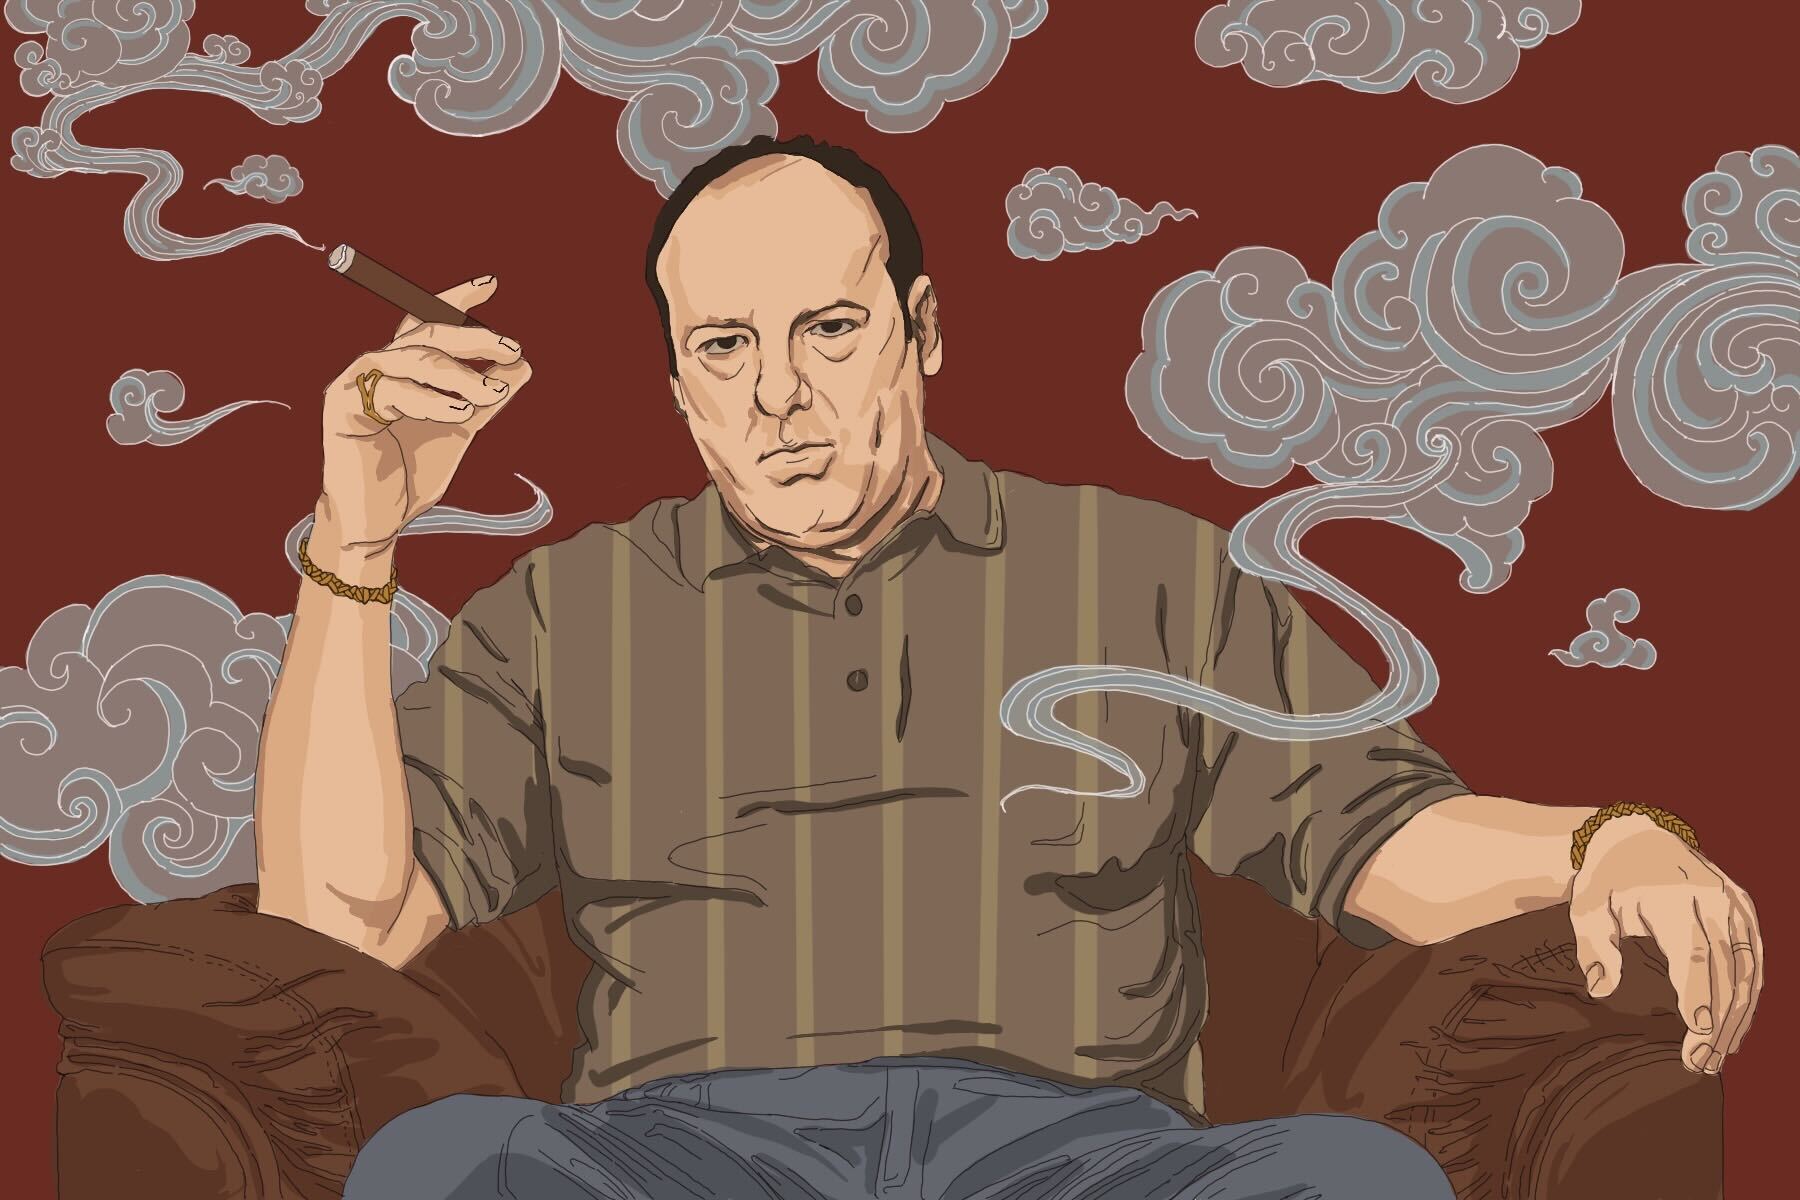 An illustration of the main character from the Sopranos